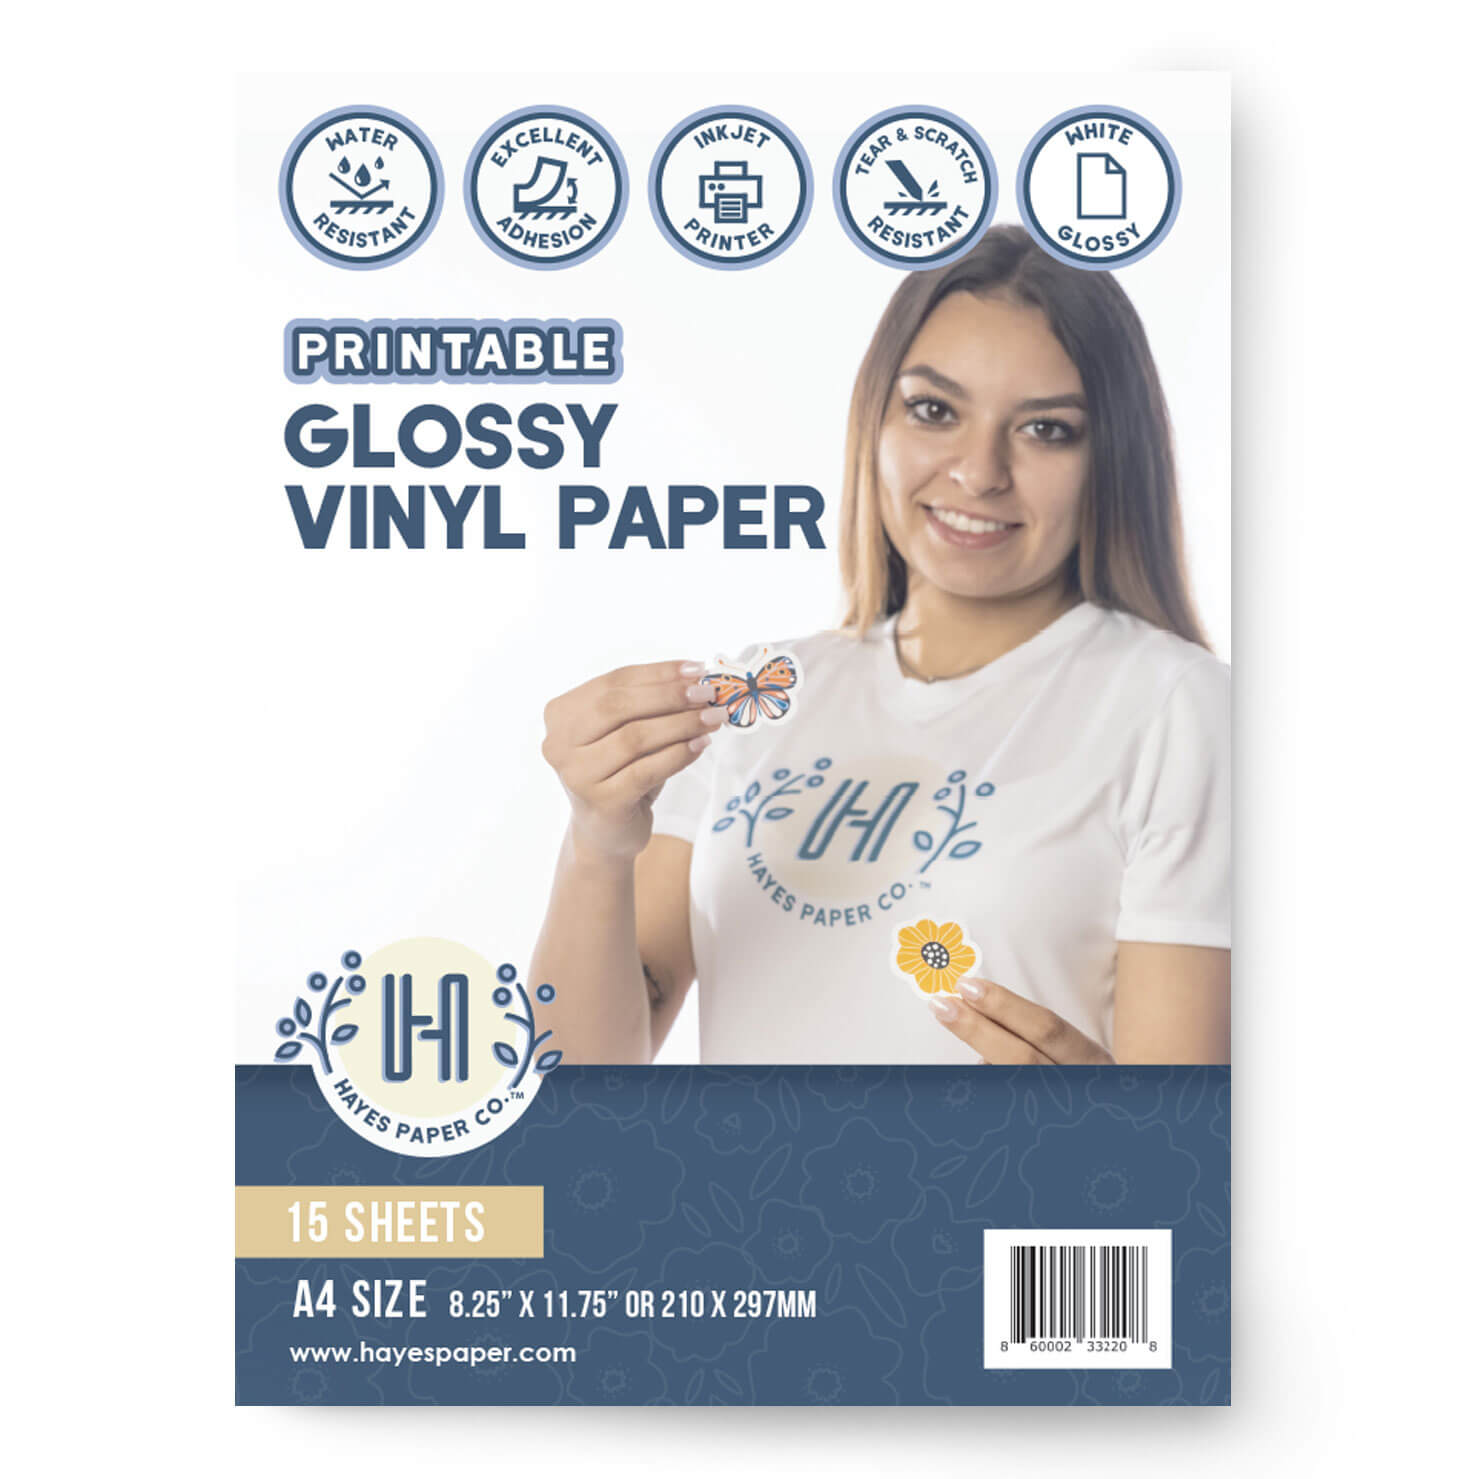 Hayes Paper, Vinyl Sticker Paper for Inkjet Printers, 15 Premium Glossy White Waterproof Vinyl Sheets, A4 Size